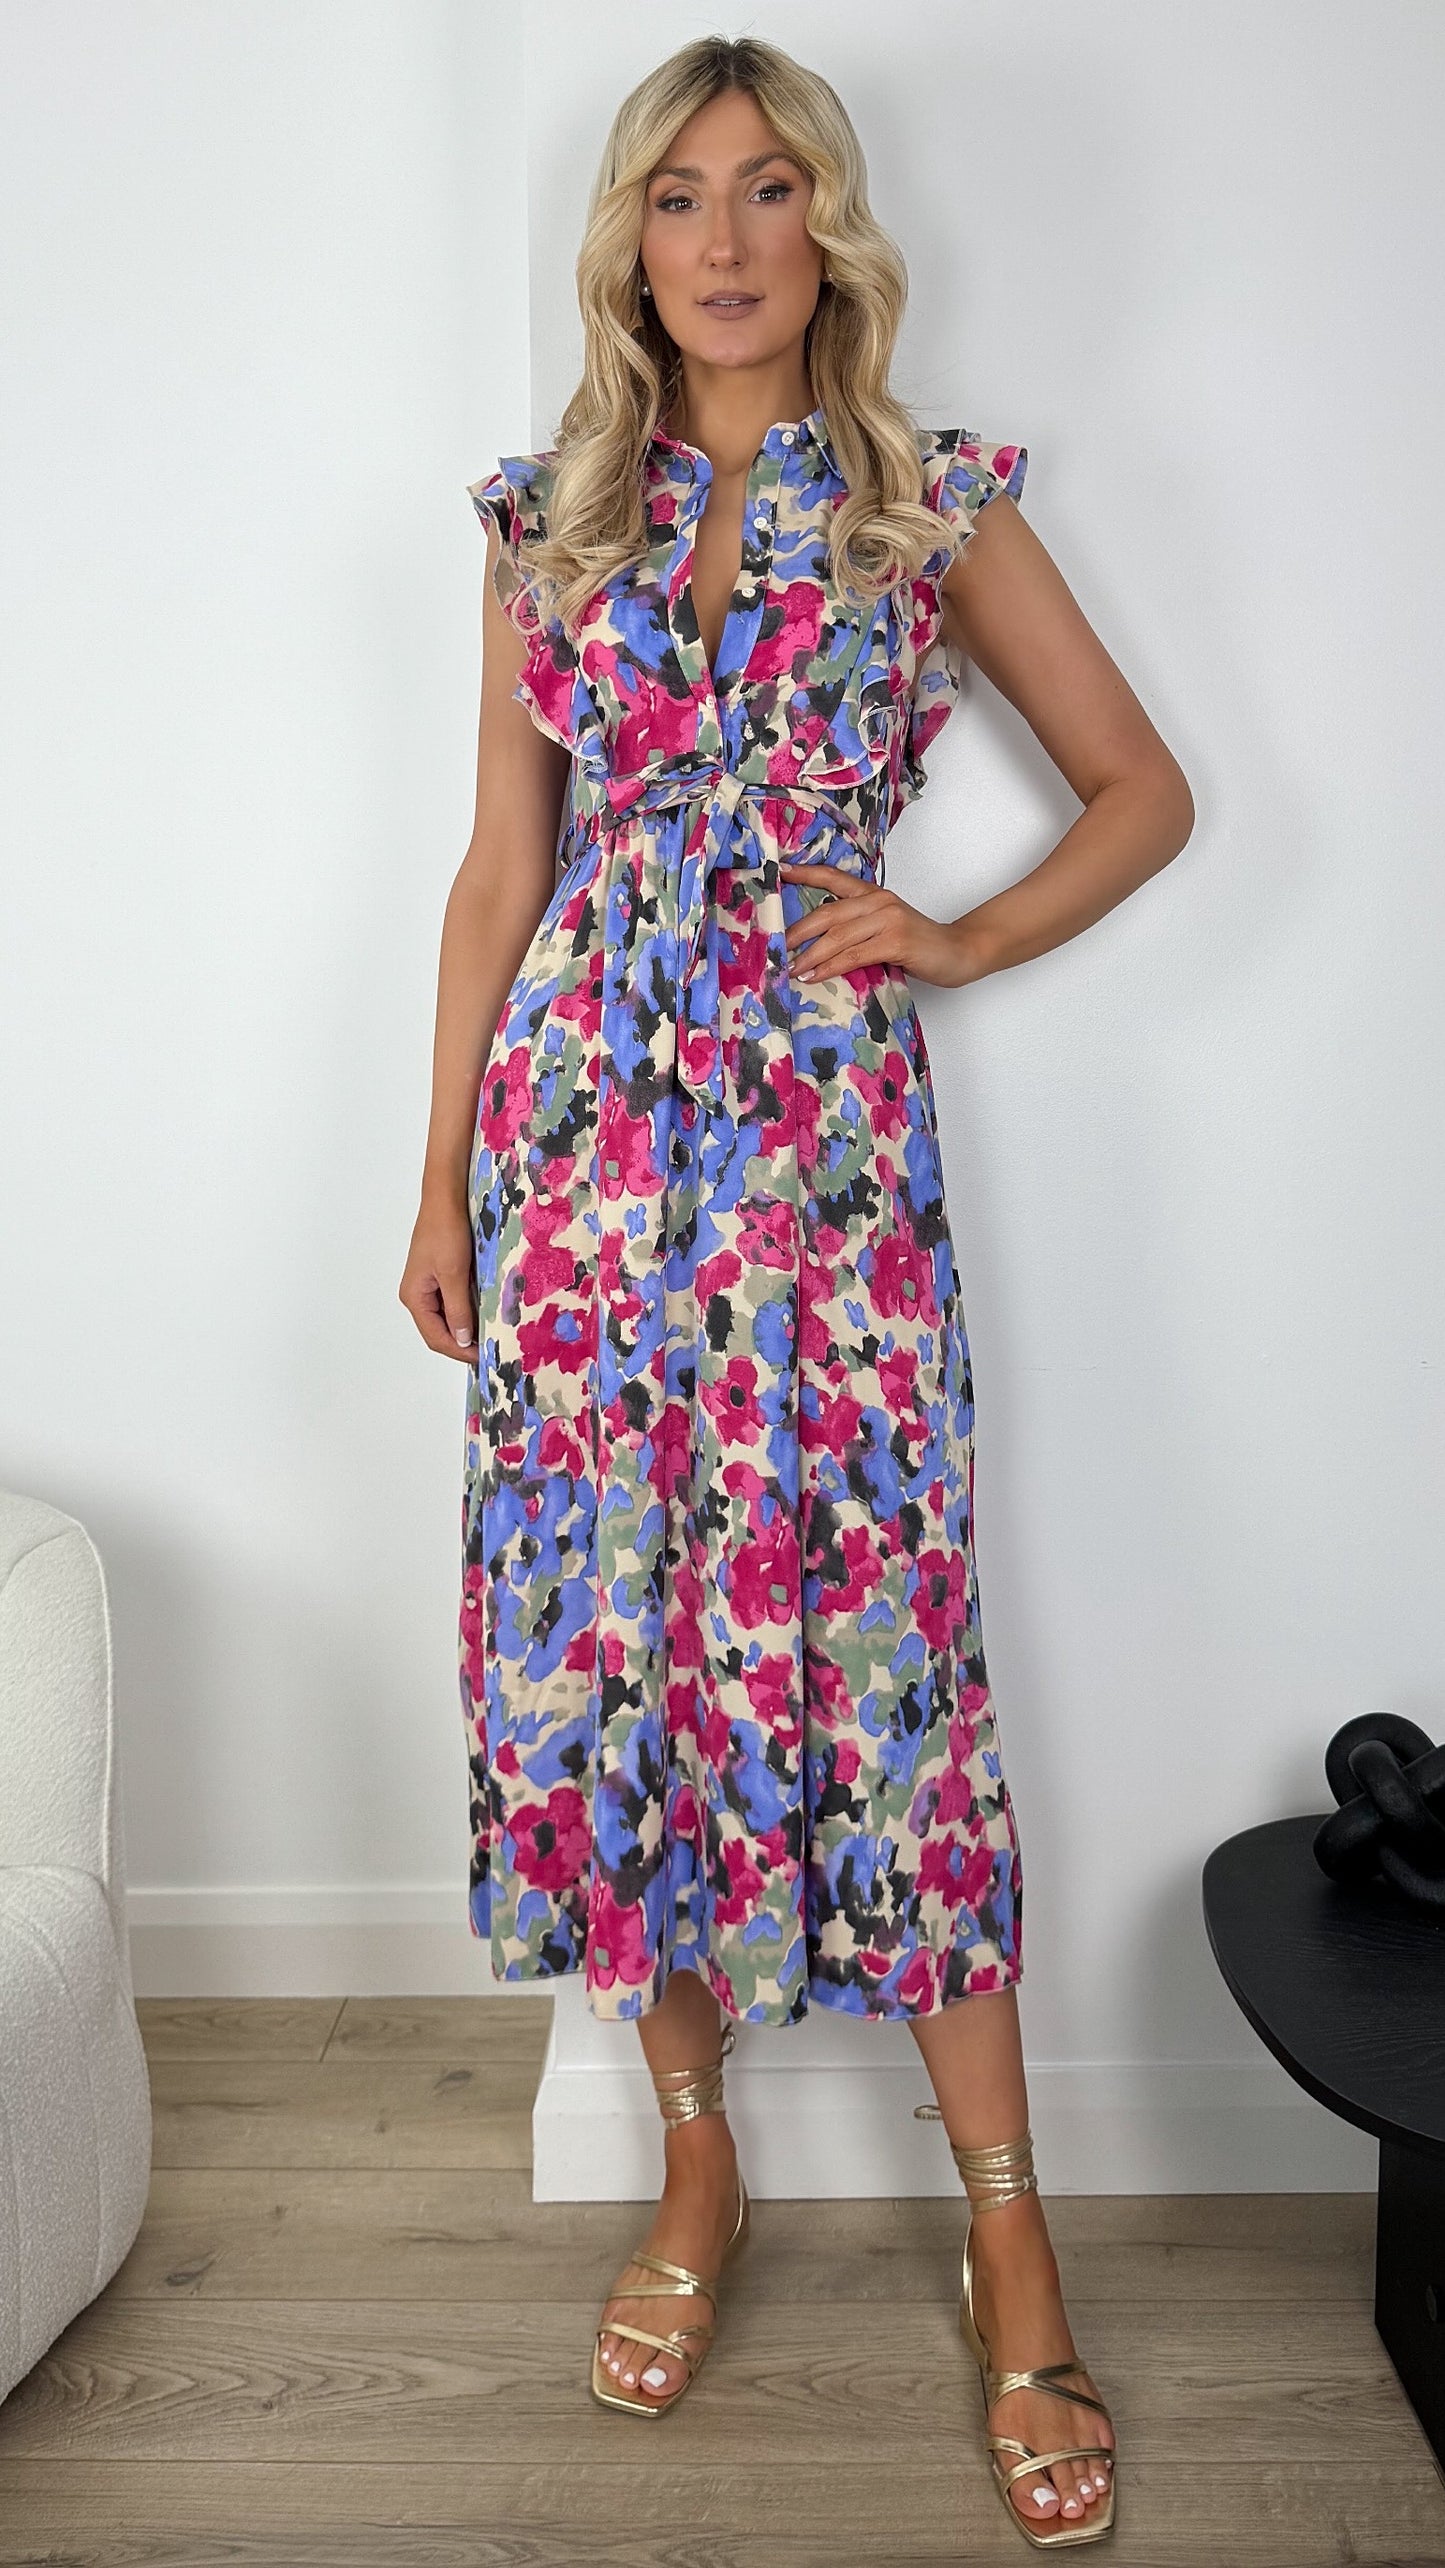 Beatrice Maxi Printed Dress with Frill Details